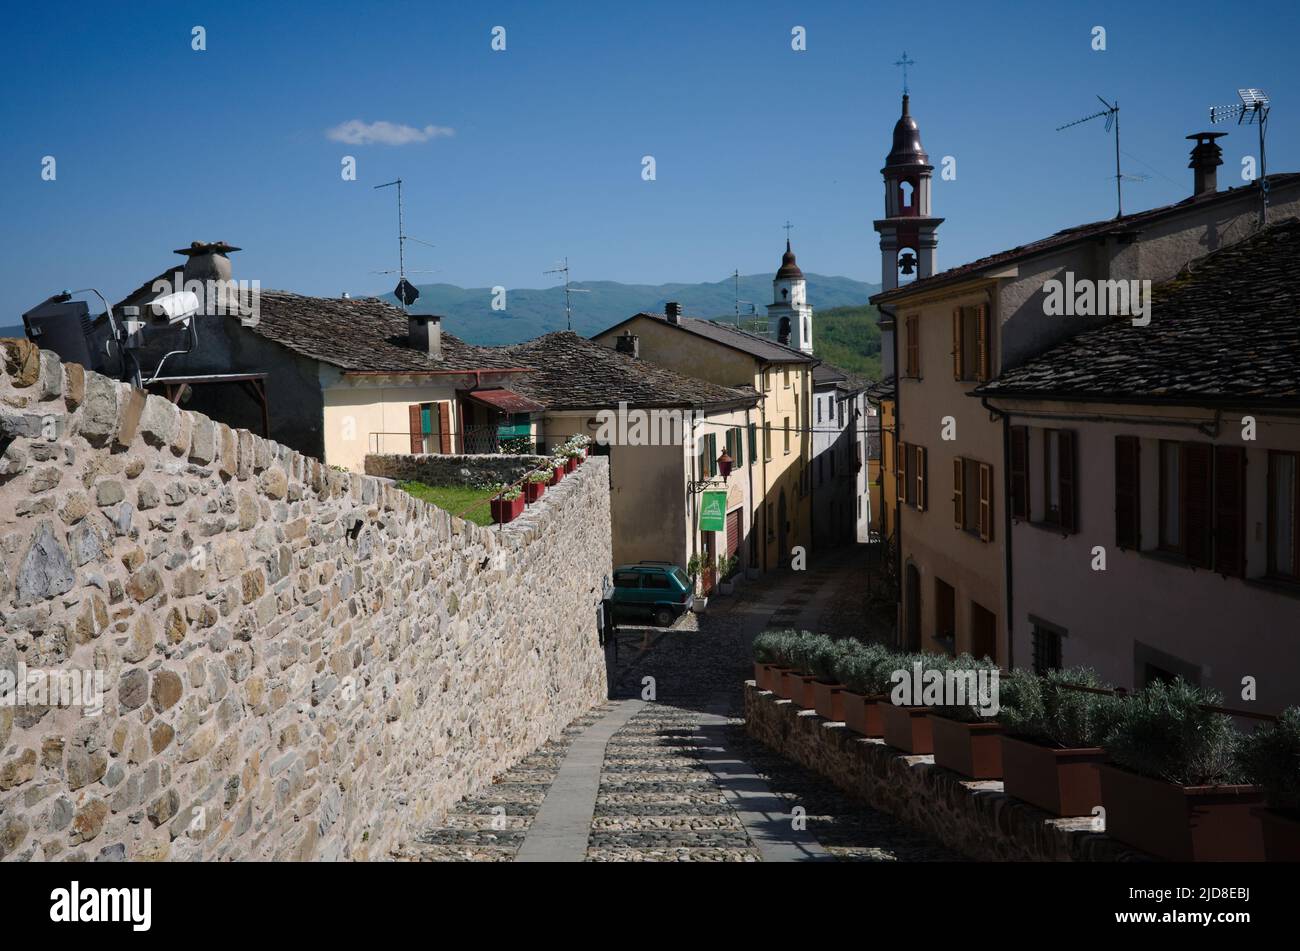 Compiano, Parma, Italy - May, 2022: Narrow cobbled street in Italian village. Typical Italian village with old houses with stone tiles and bell tower Stock Photo